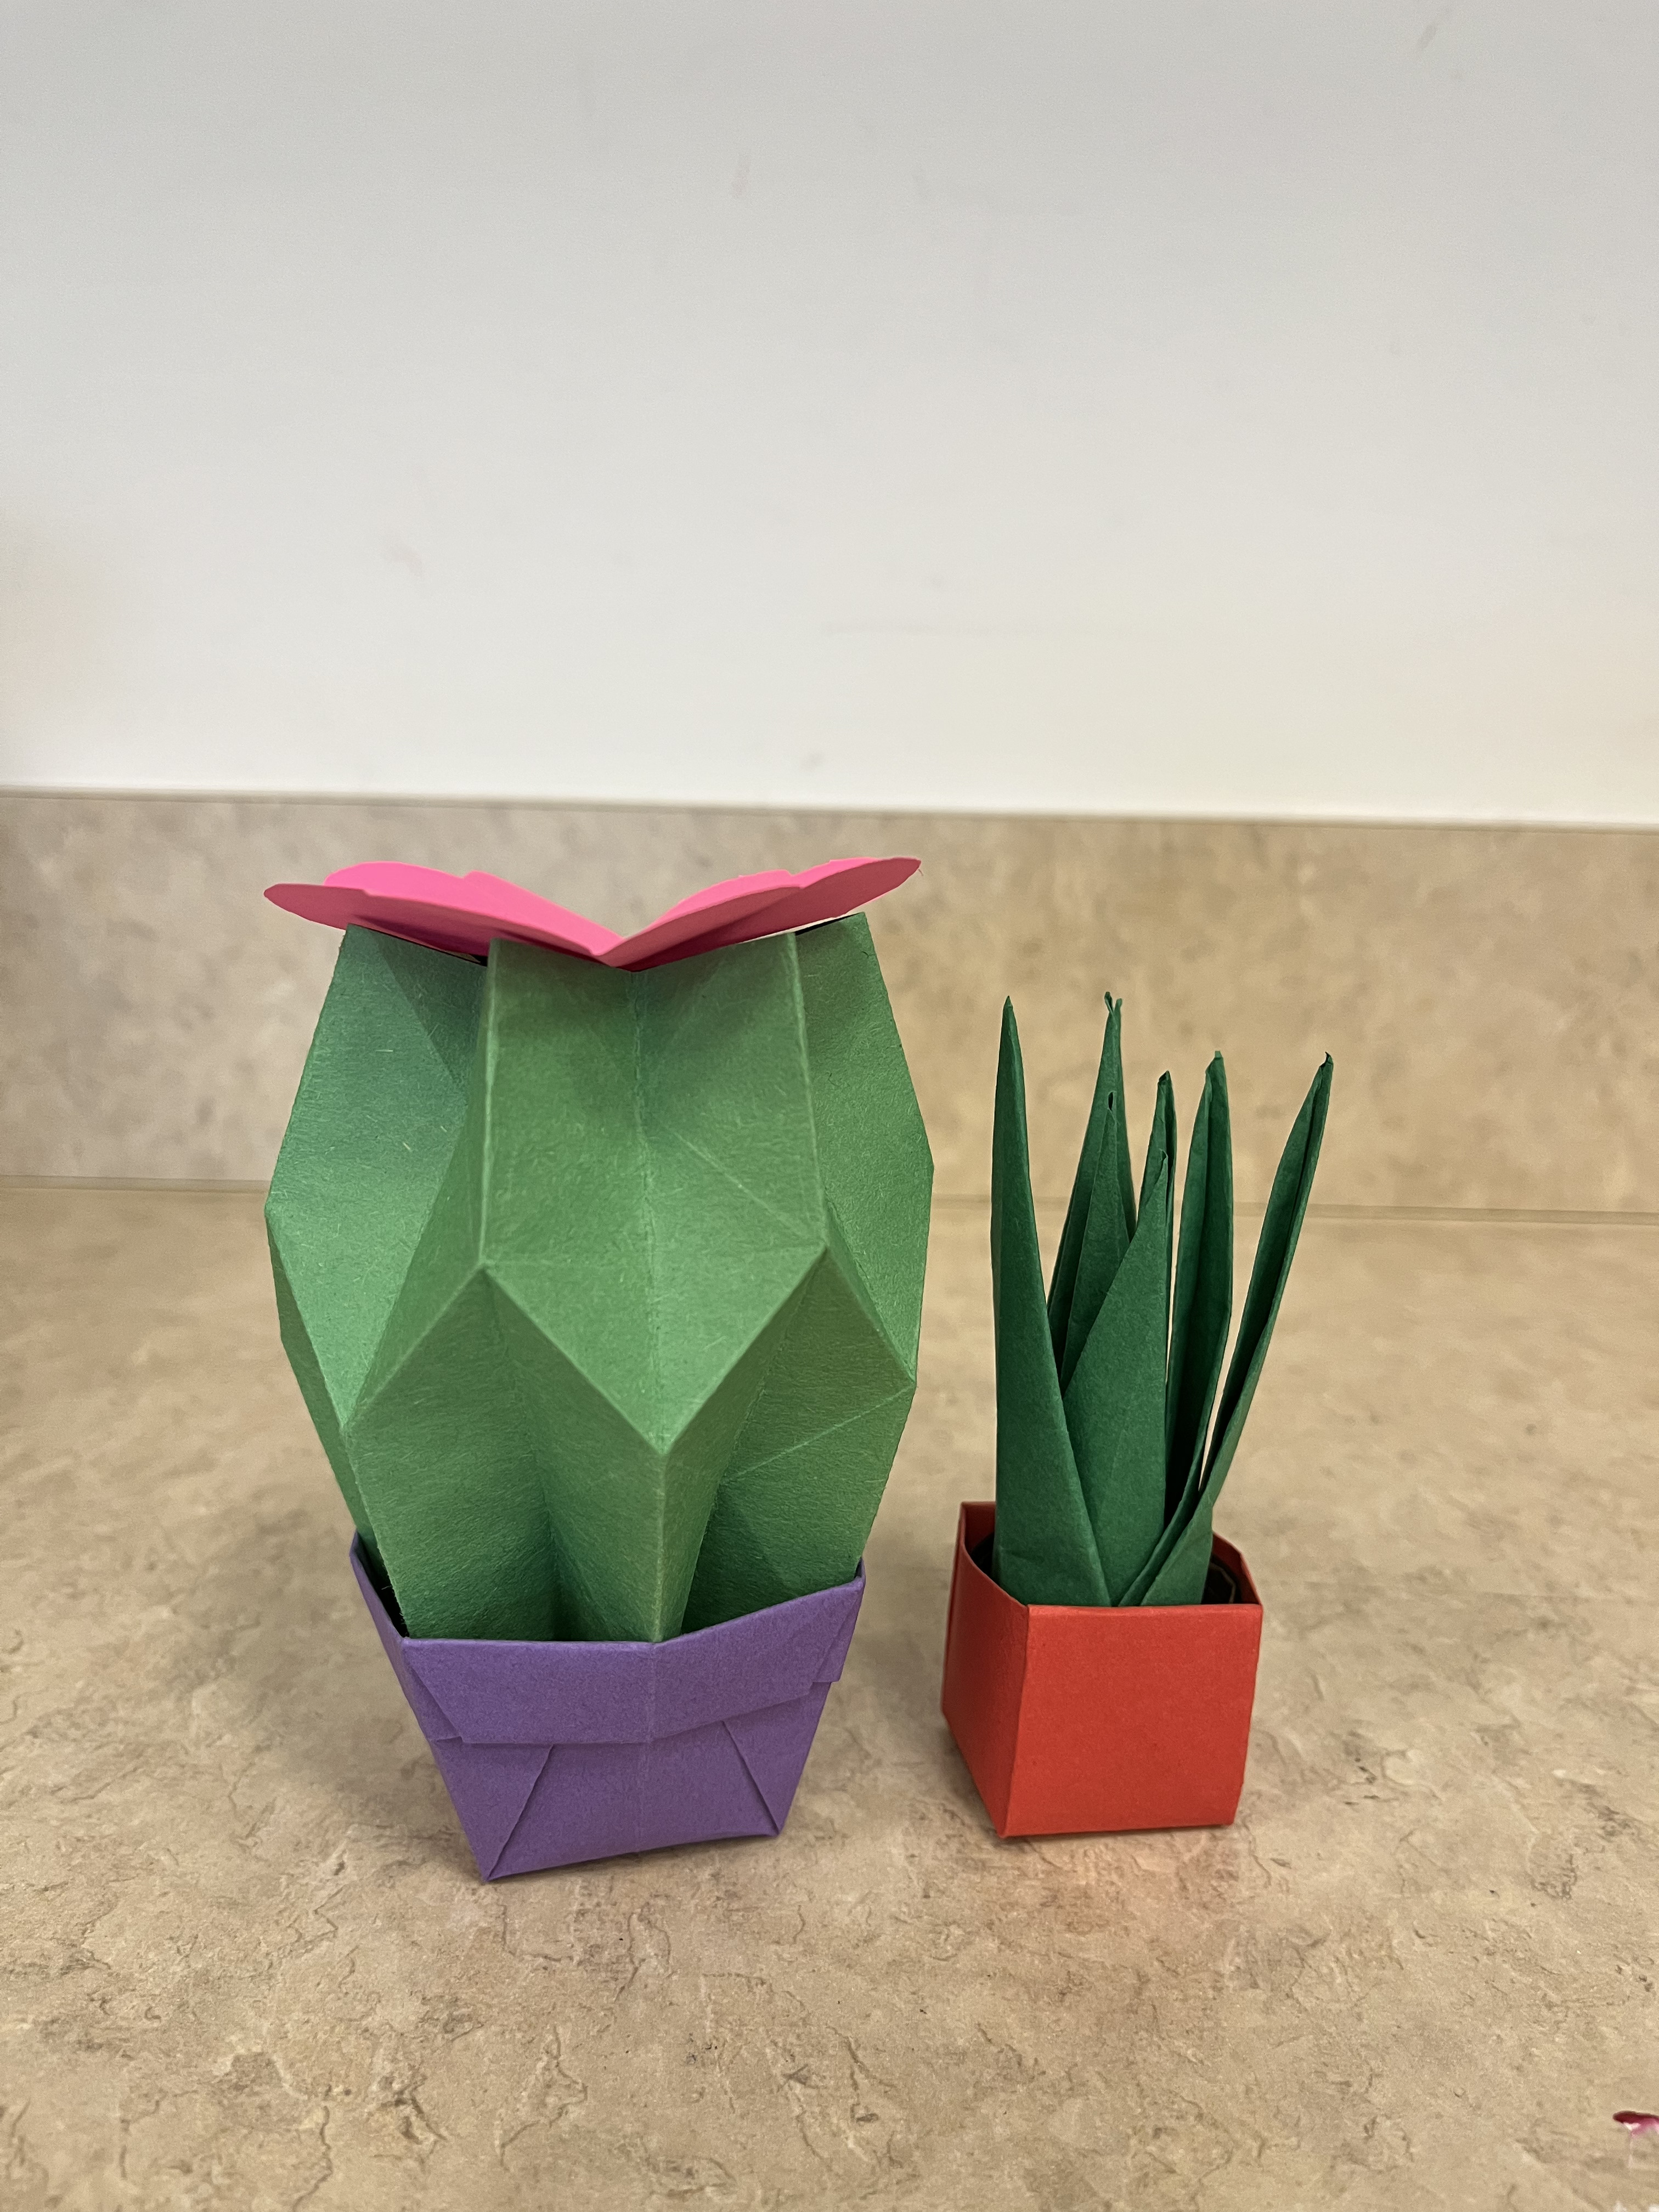 Two examples of succulents made from origami paper, one cactus-like, and one aloe-like